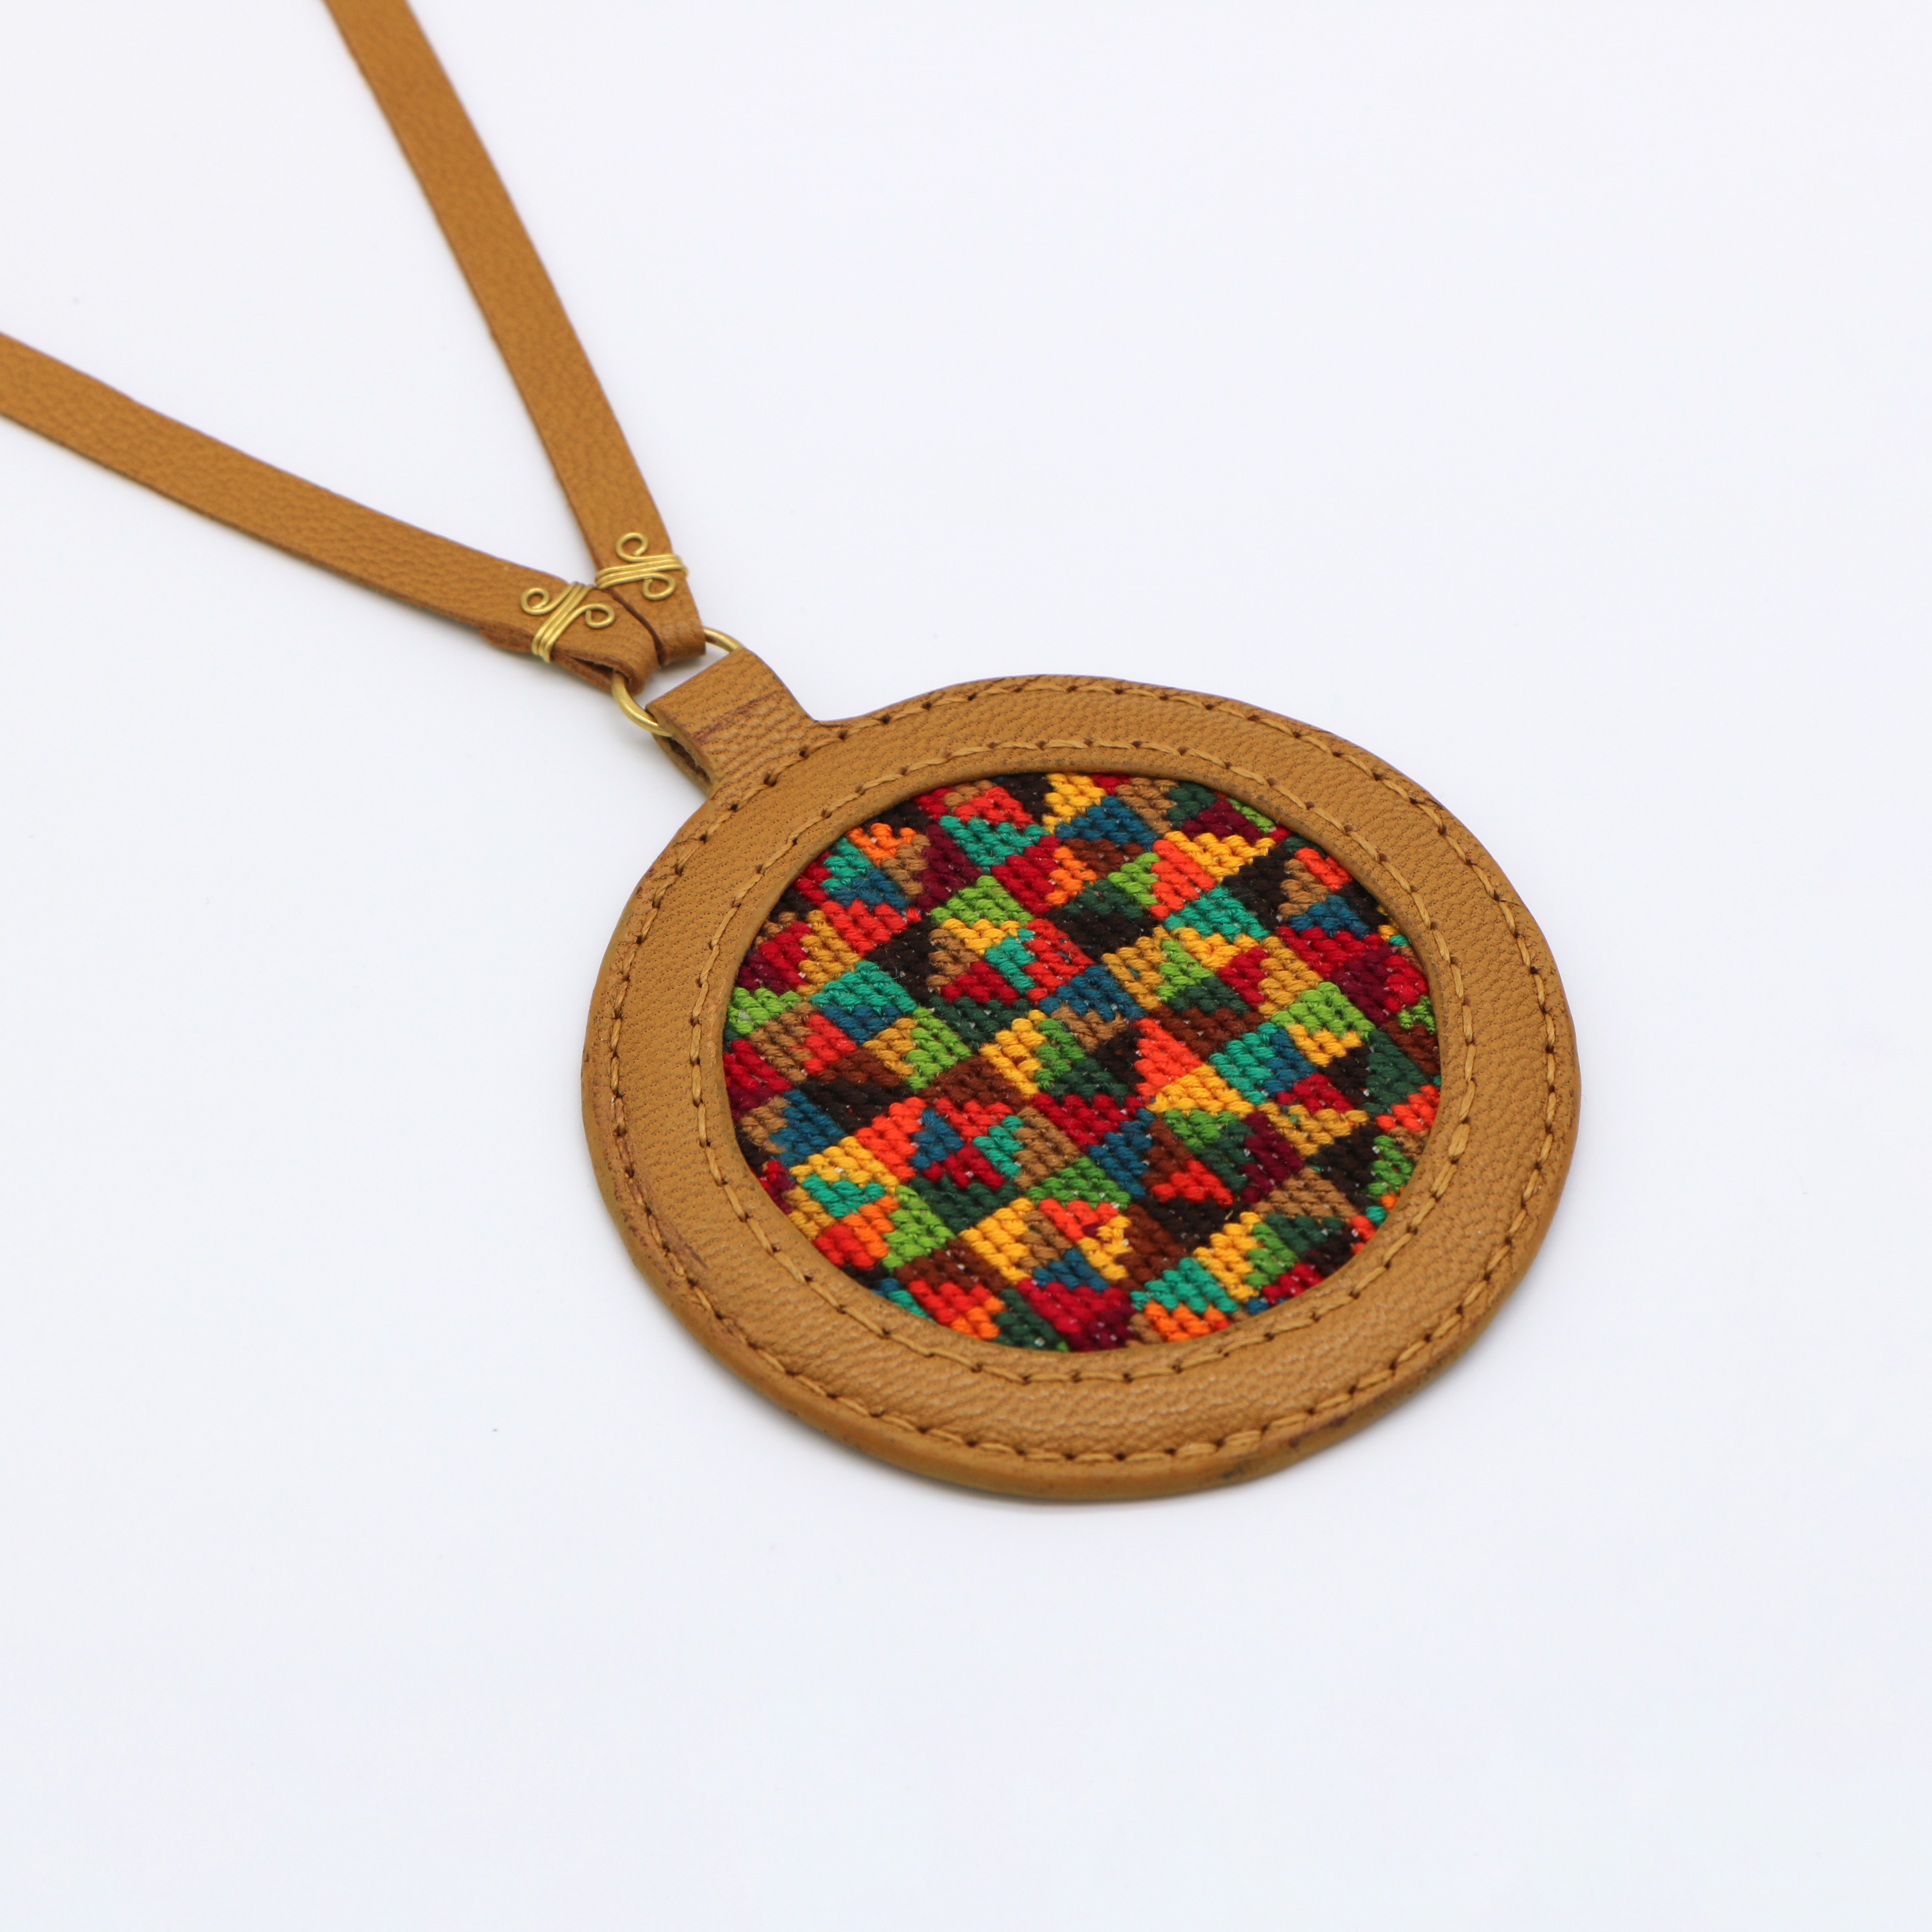 Genuine leather necklace with colorful Cross-stitching